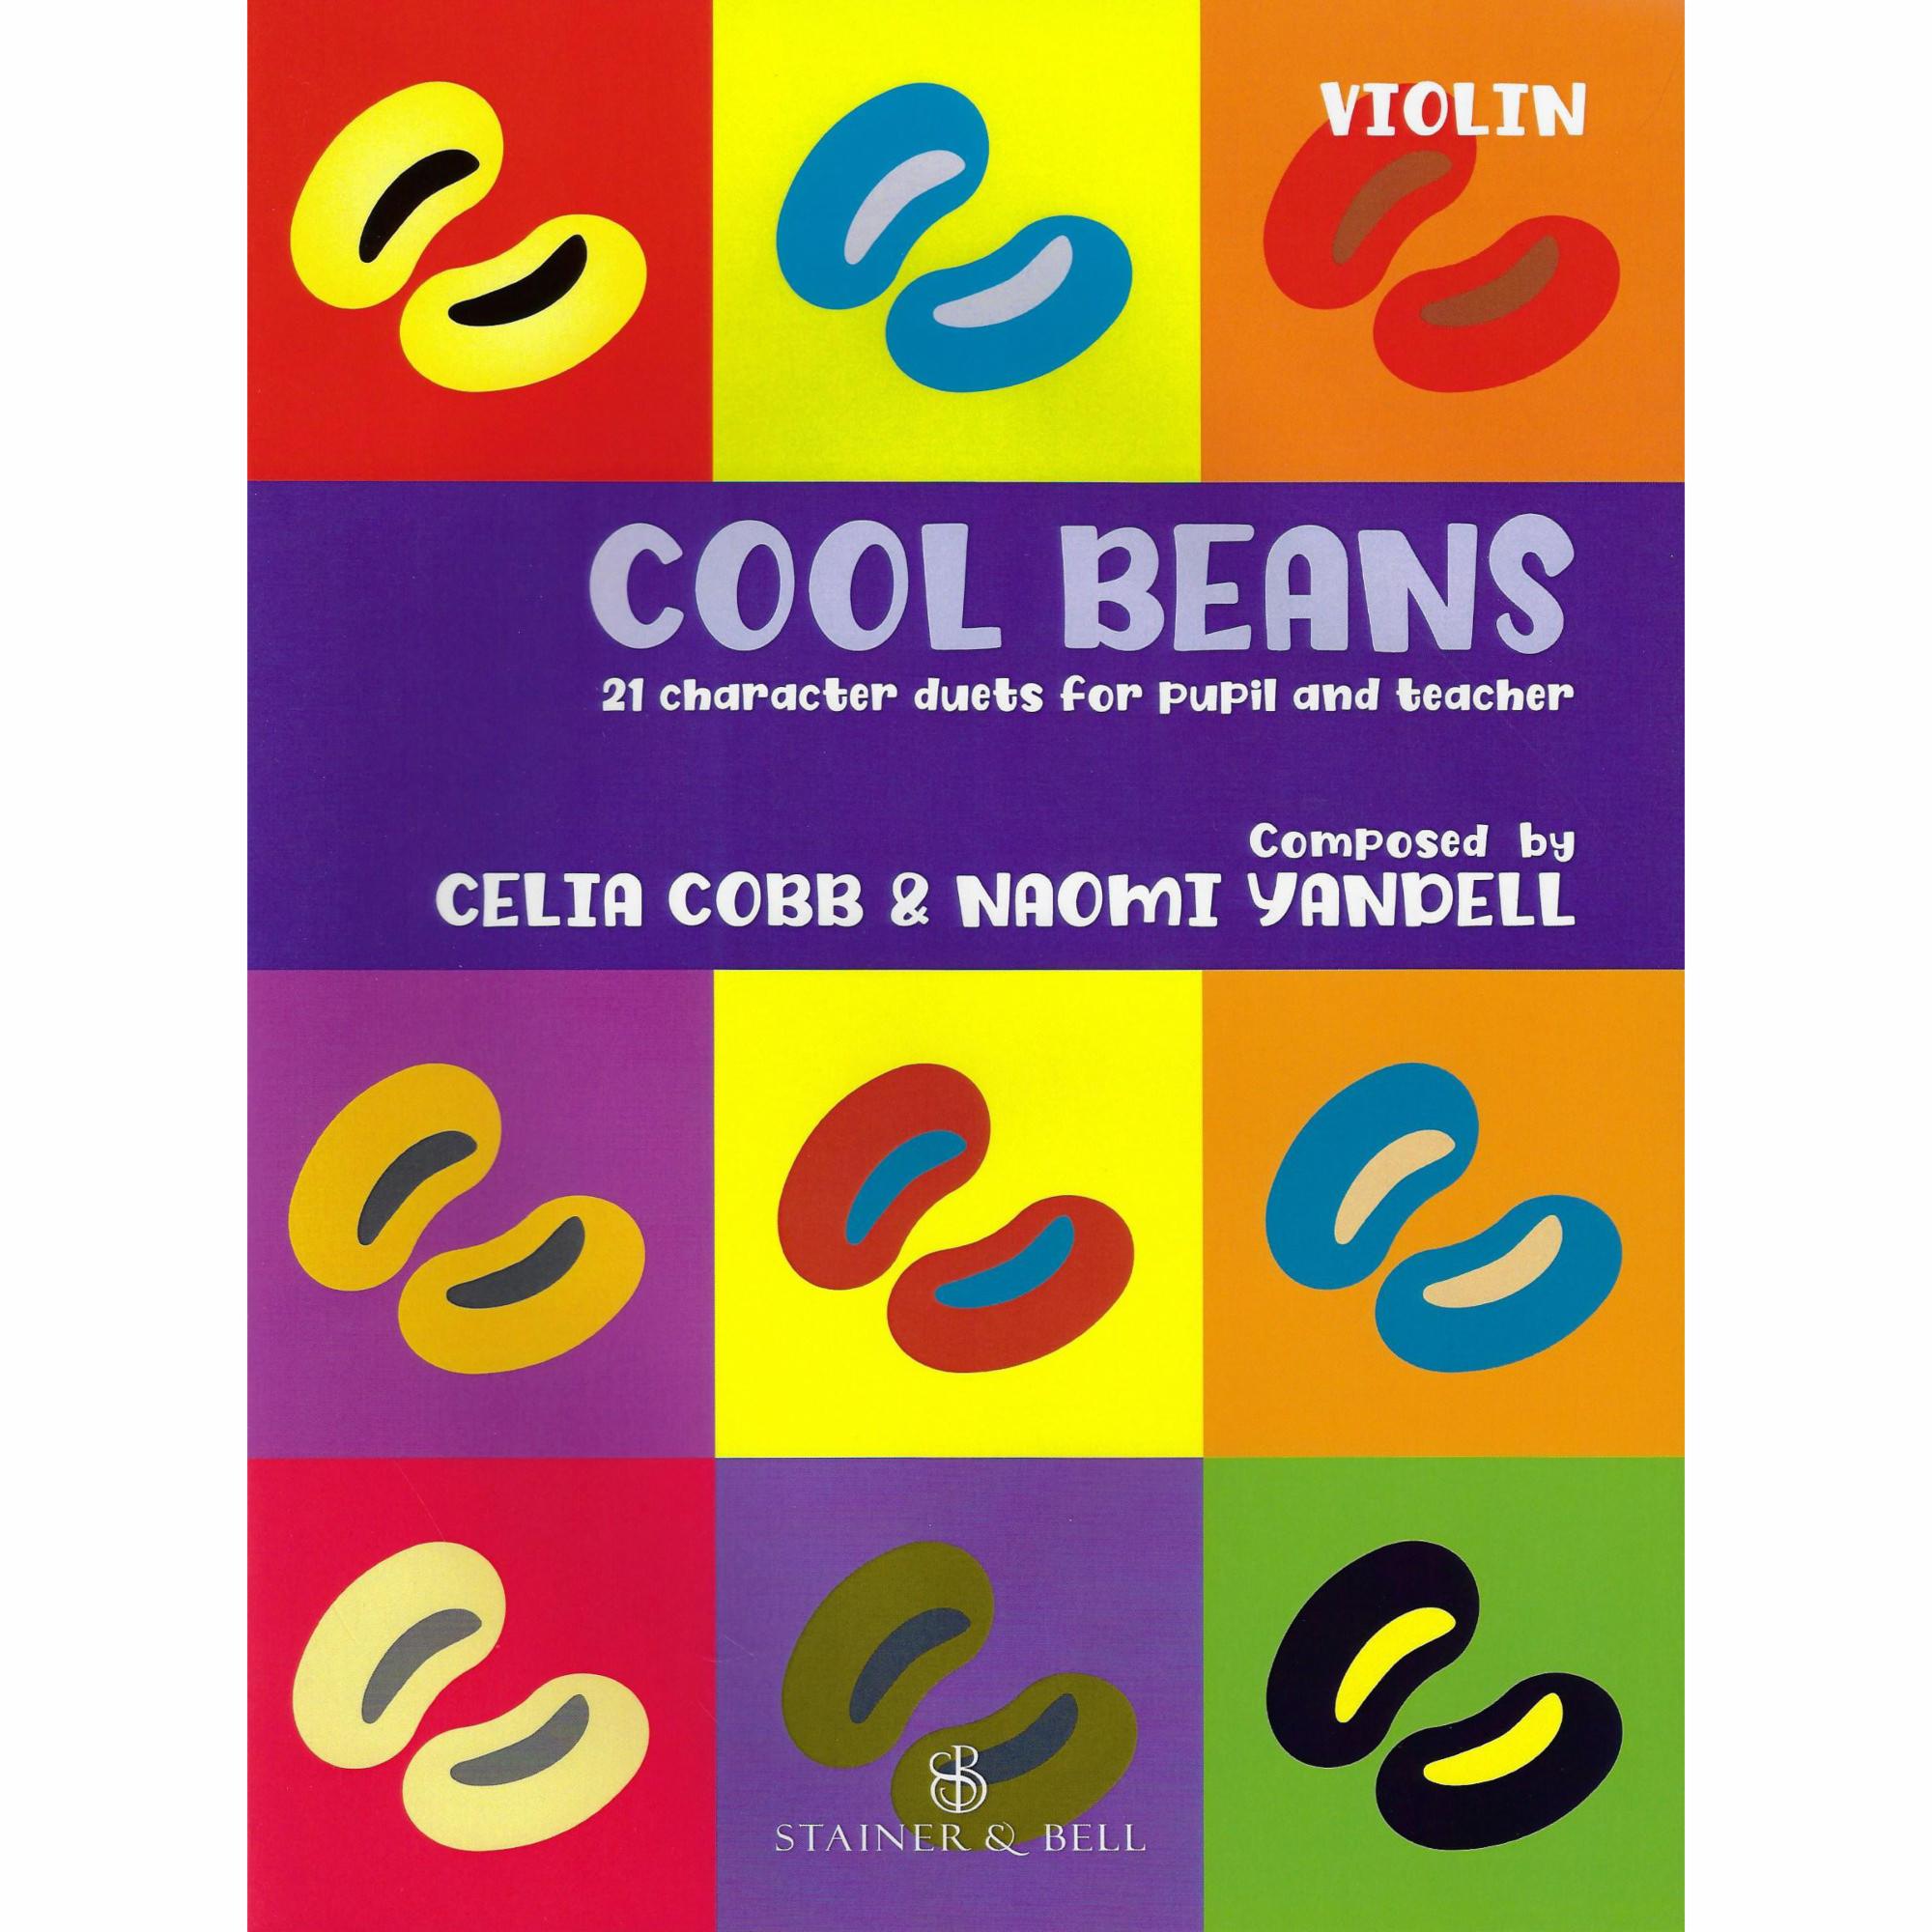 Cool Beans for Violin, Viola, or Cello